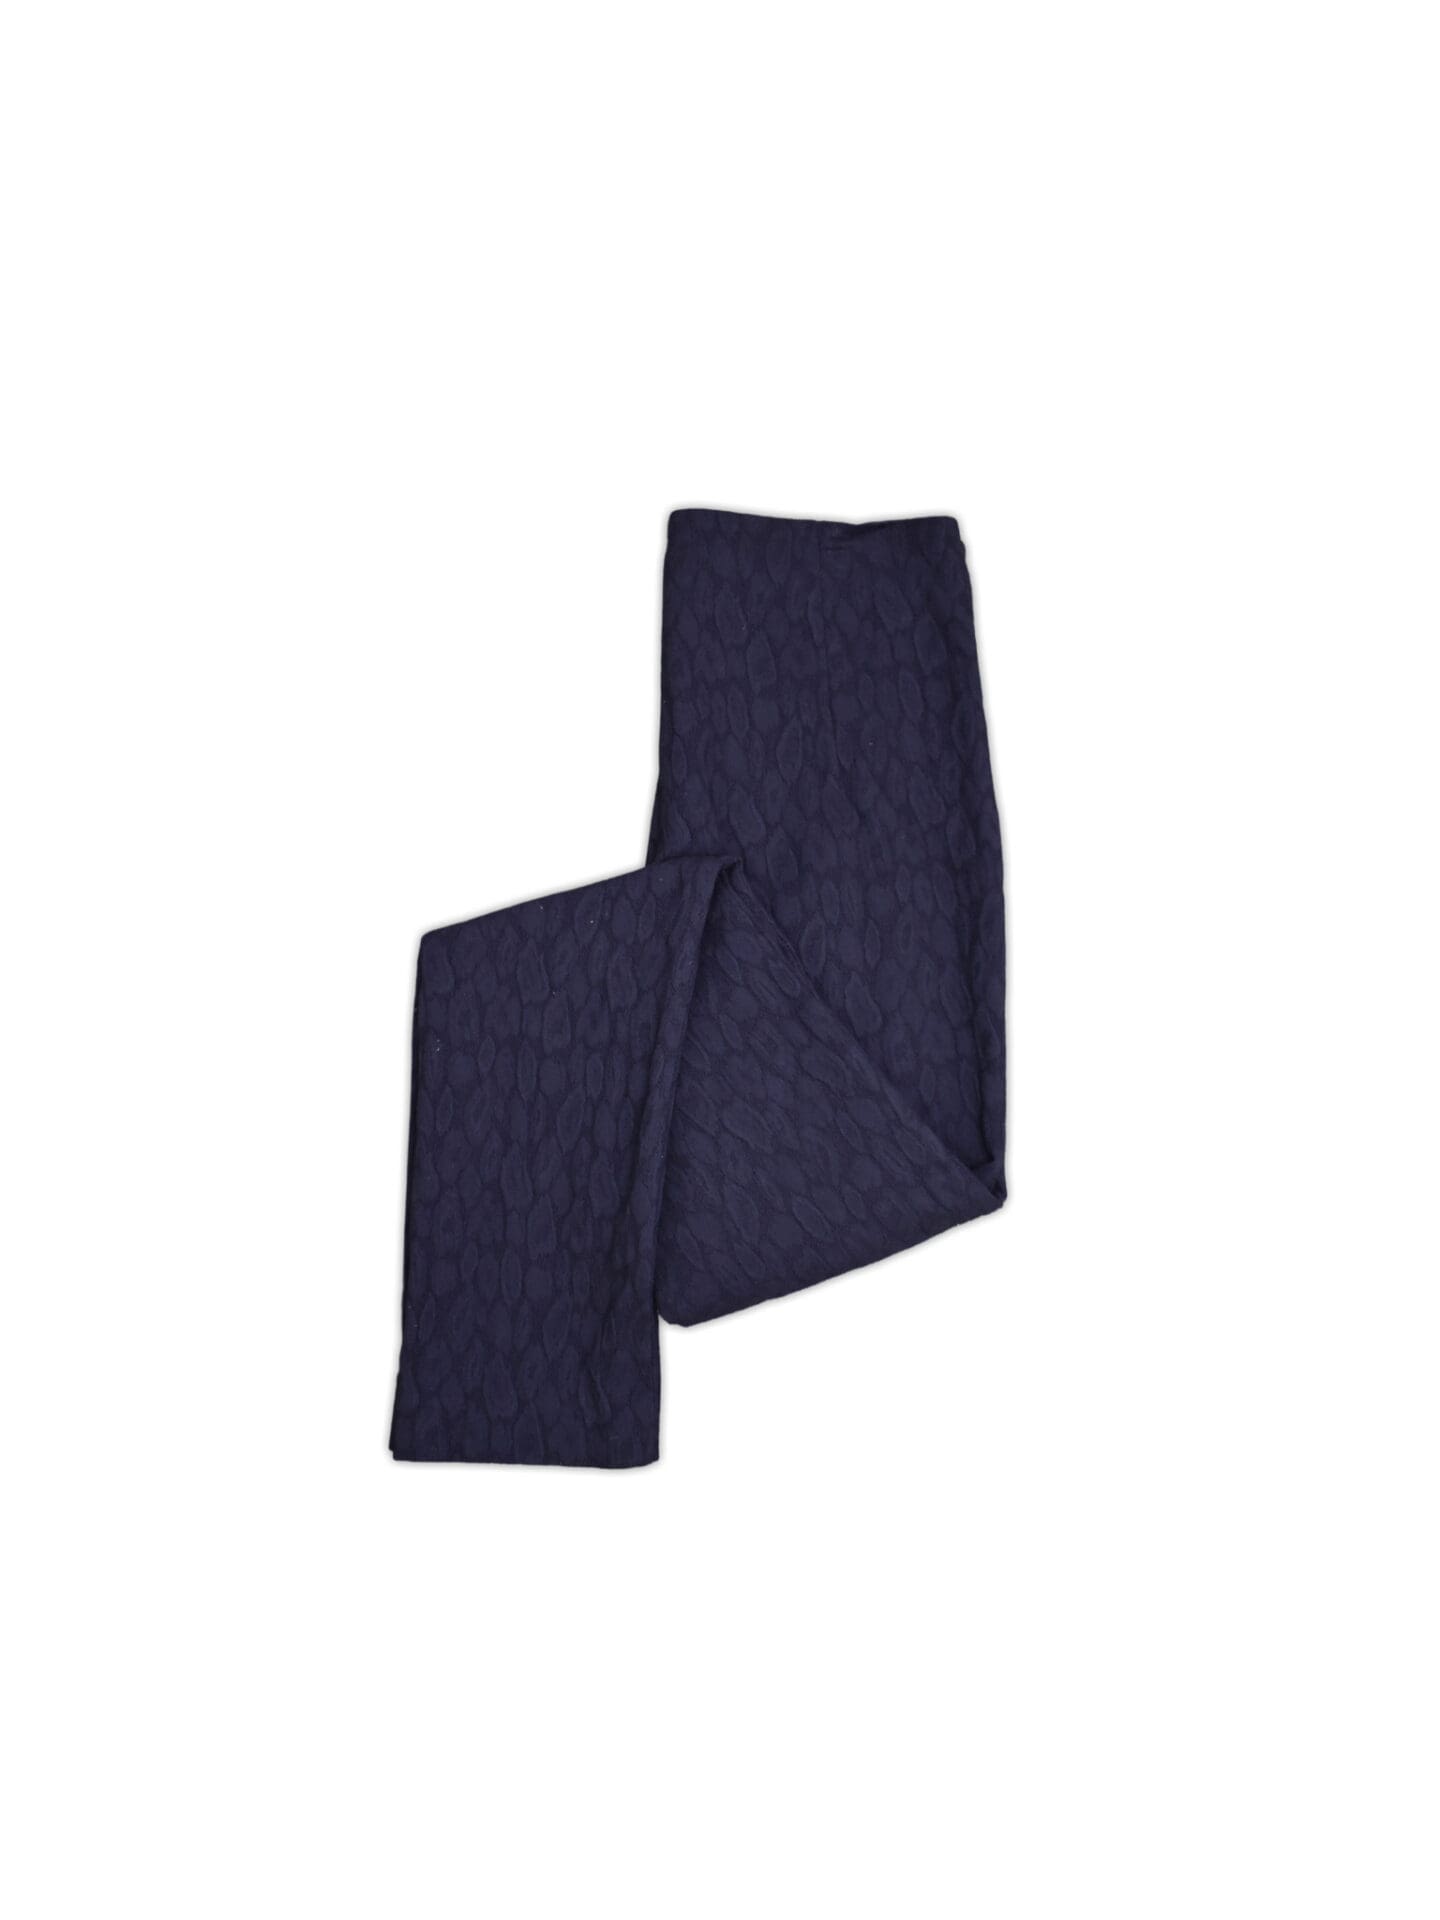 Slim cut navy pant size 14 with Spandex for stretch